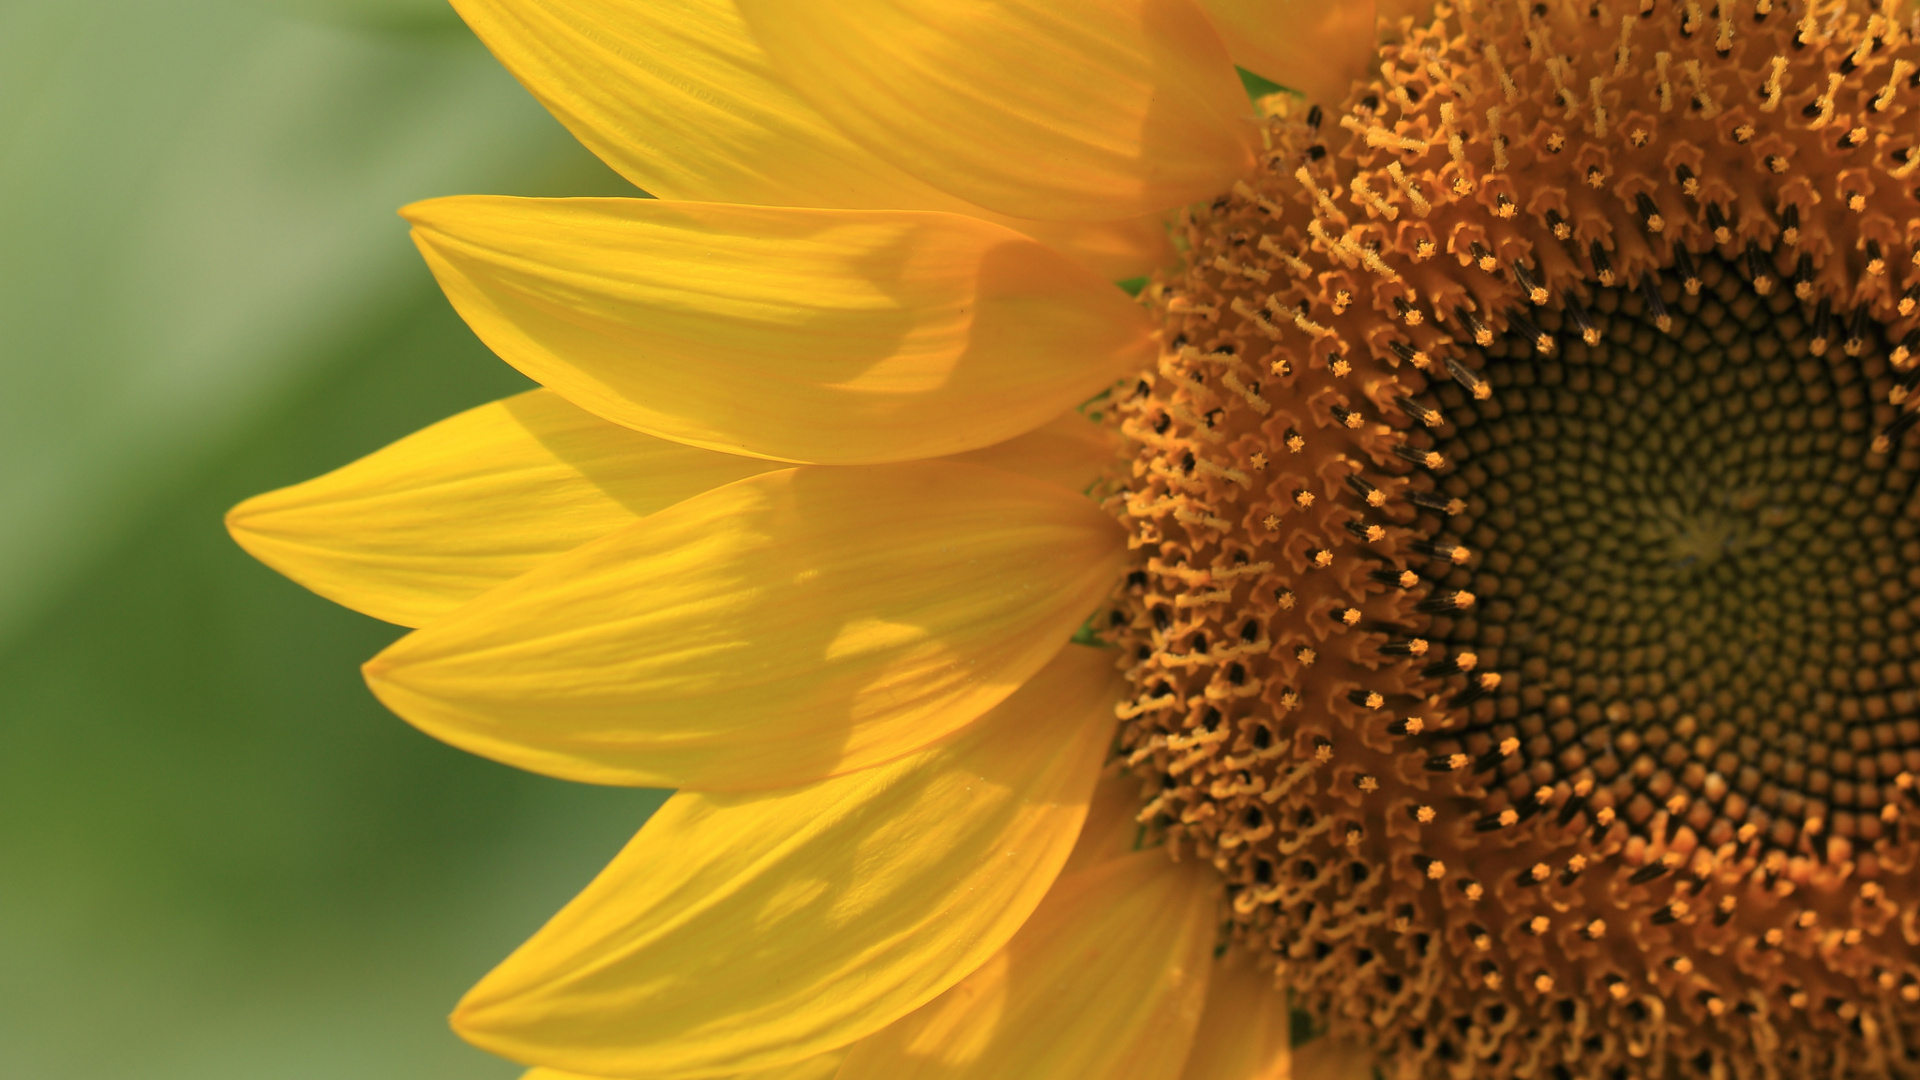 Yellow Sunflower in Close up Photography. Wallpaper in 1920x1080 Resolution